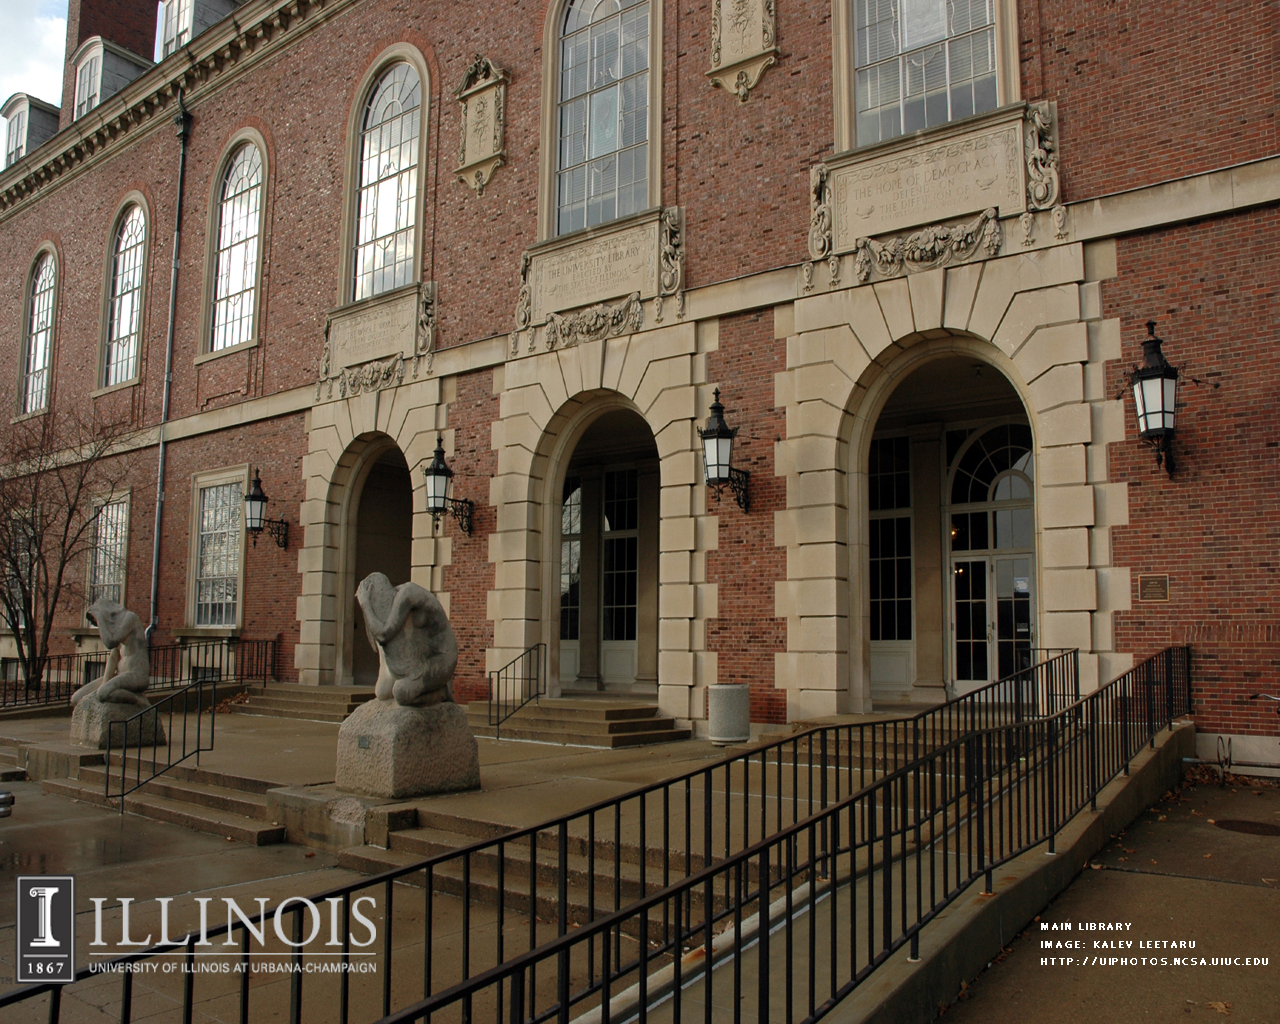 Main Library Uihistories Project Virtual Tour At The University Of